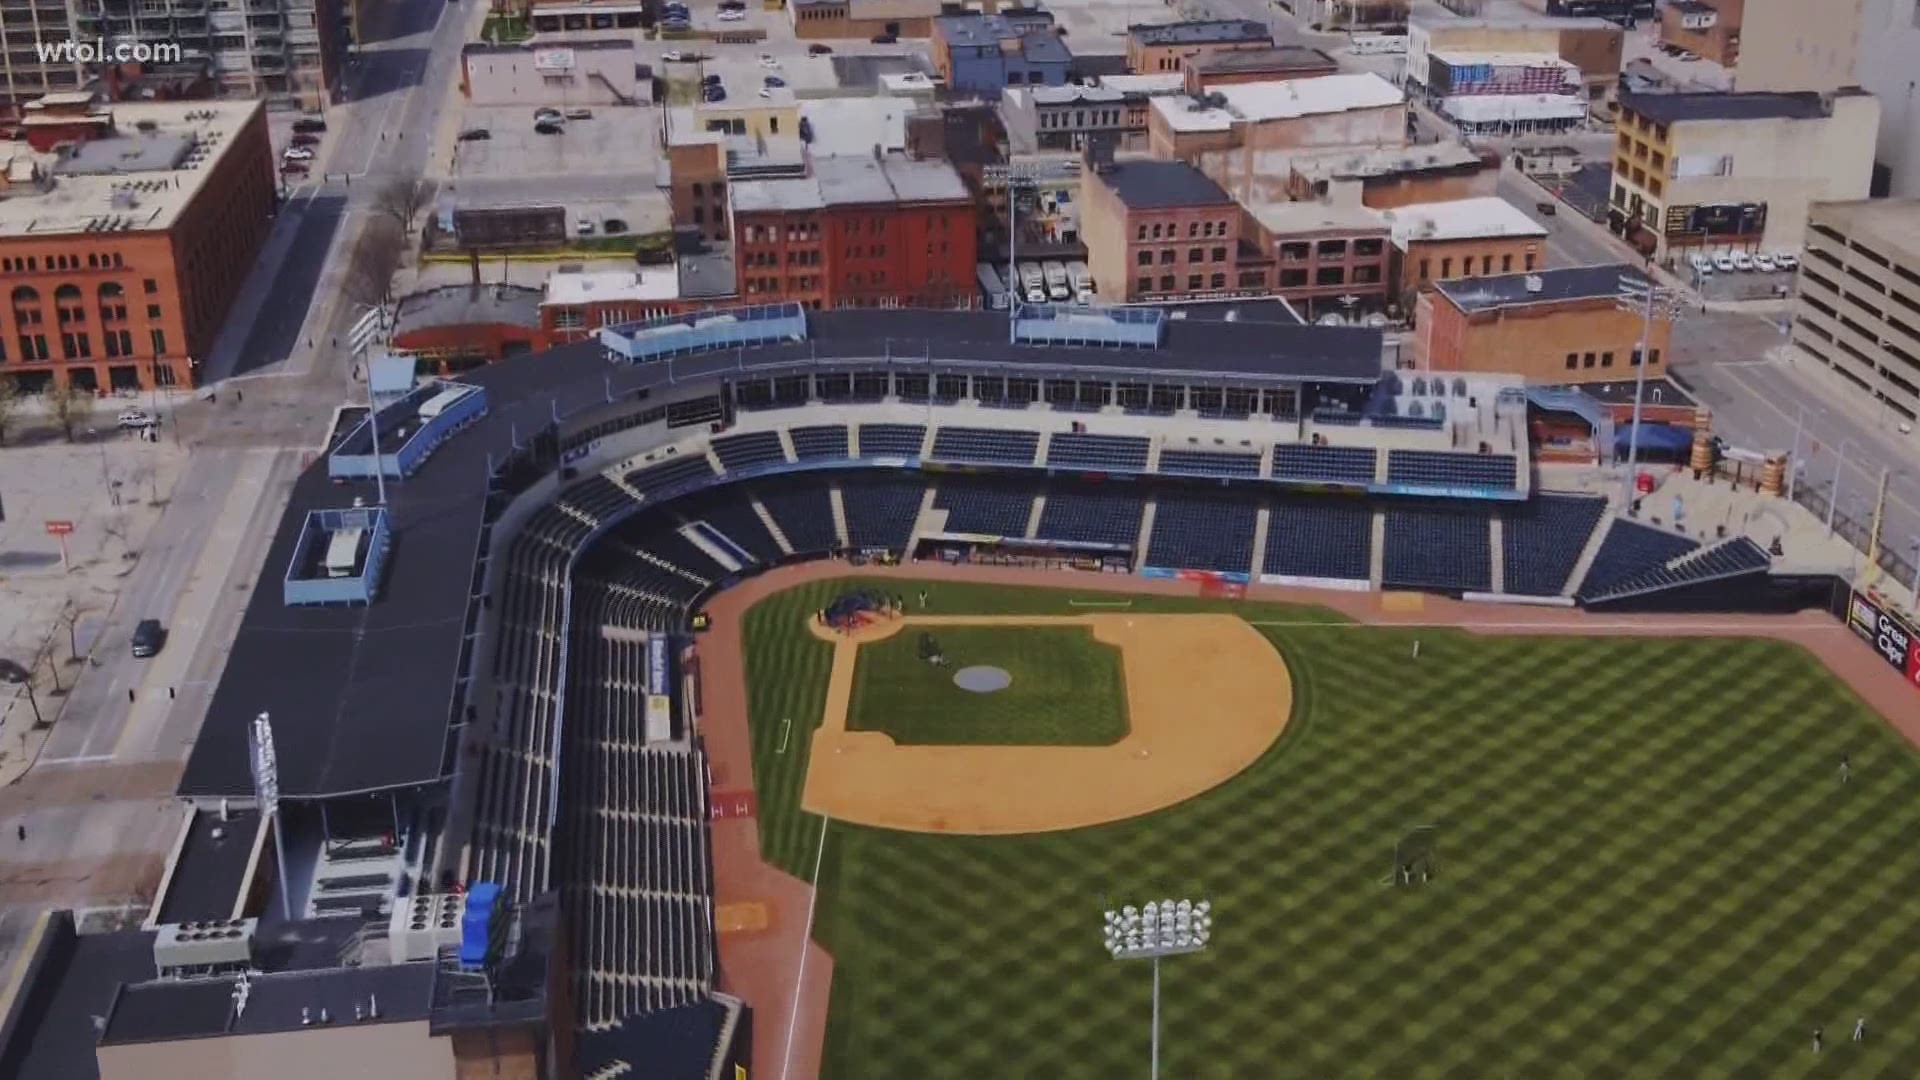 To get you prepared, we asked the Mud Hens' director of strategic planning for a look at the measures in place and the rules to follow for fans to stay safe.